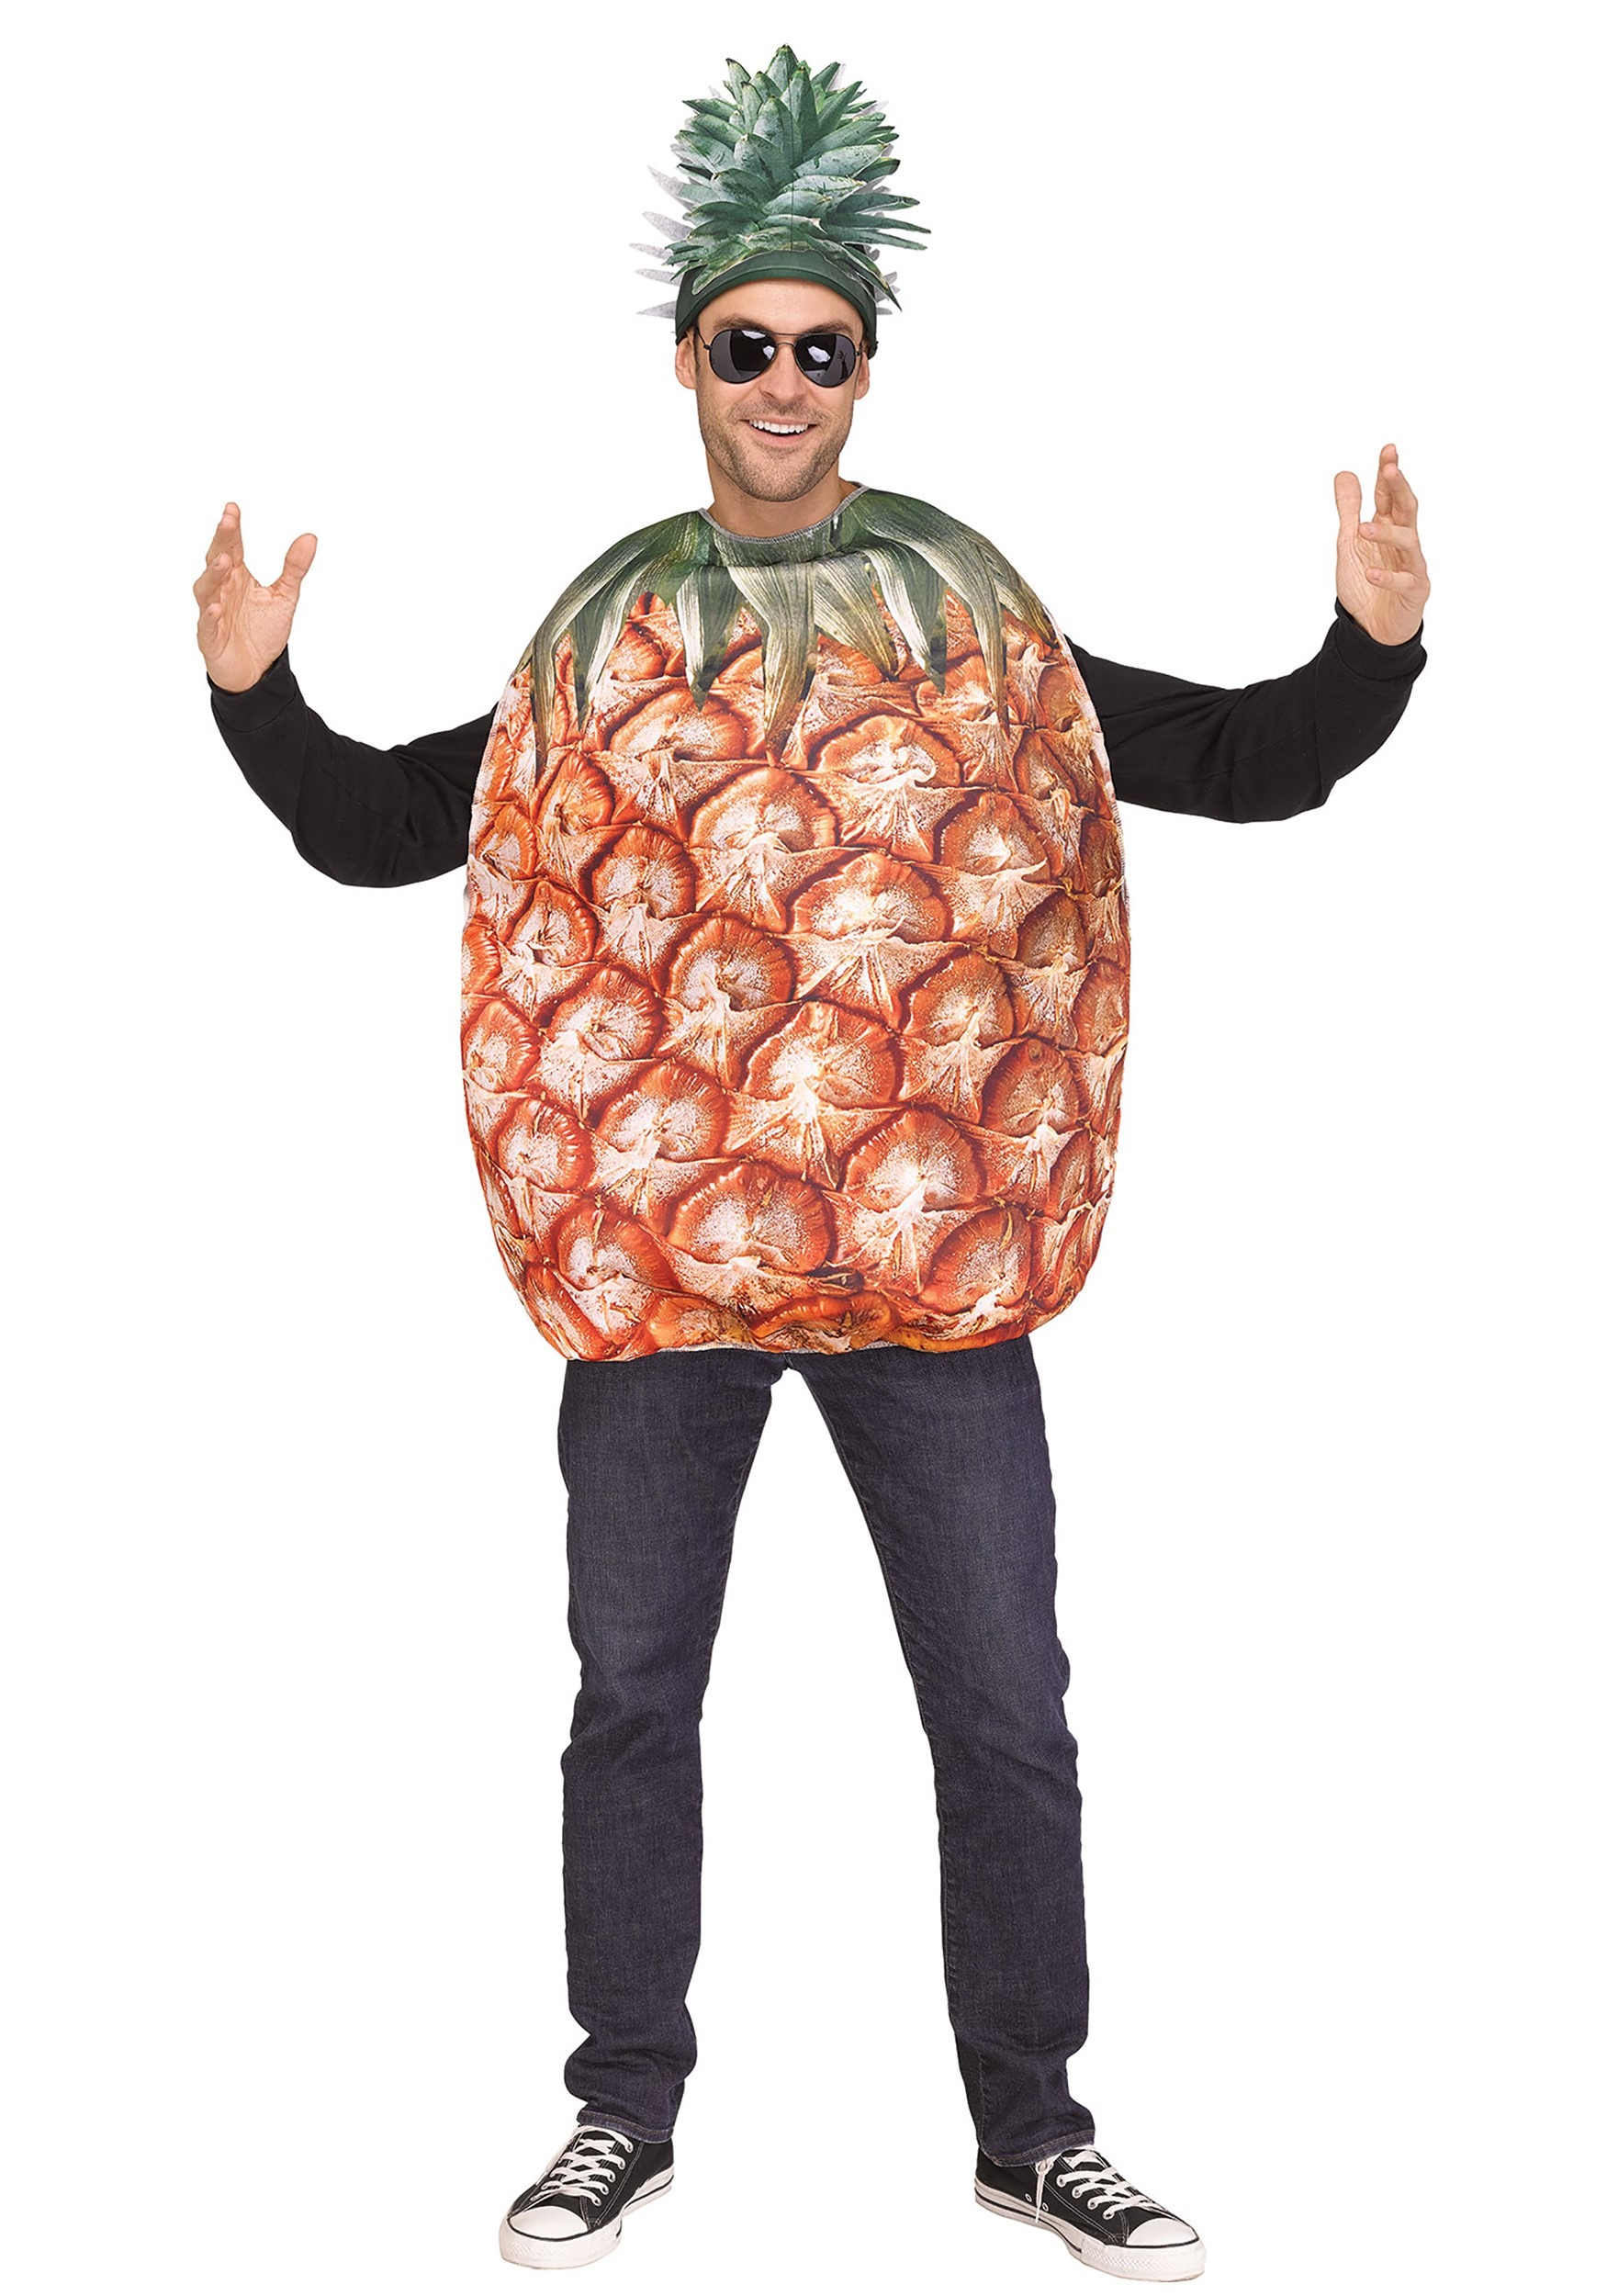 21.) Pineapple Costume for Adults